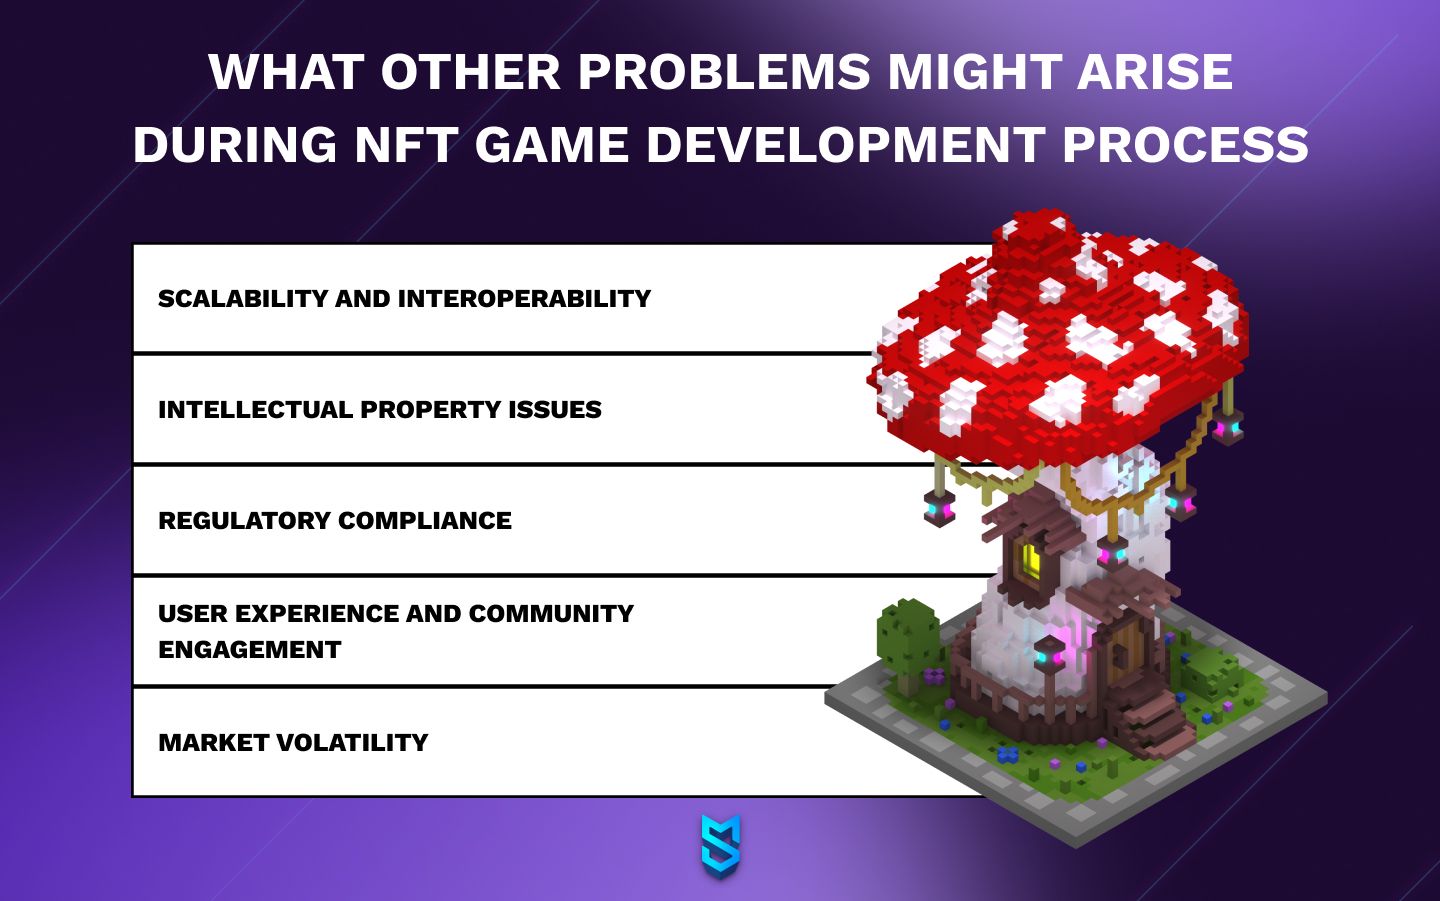 What other problems might arise during NFT game development process